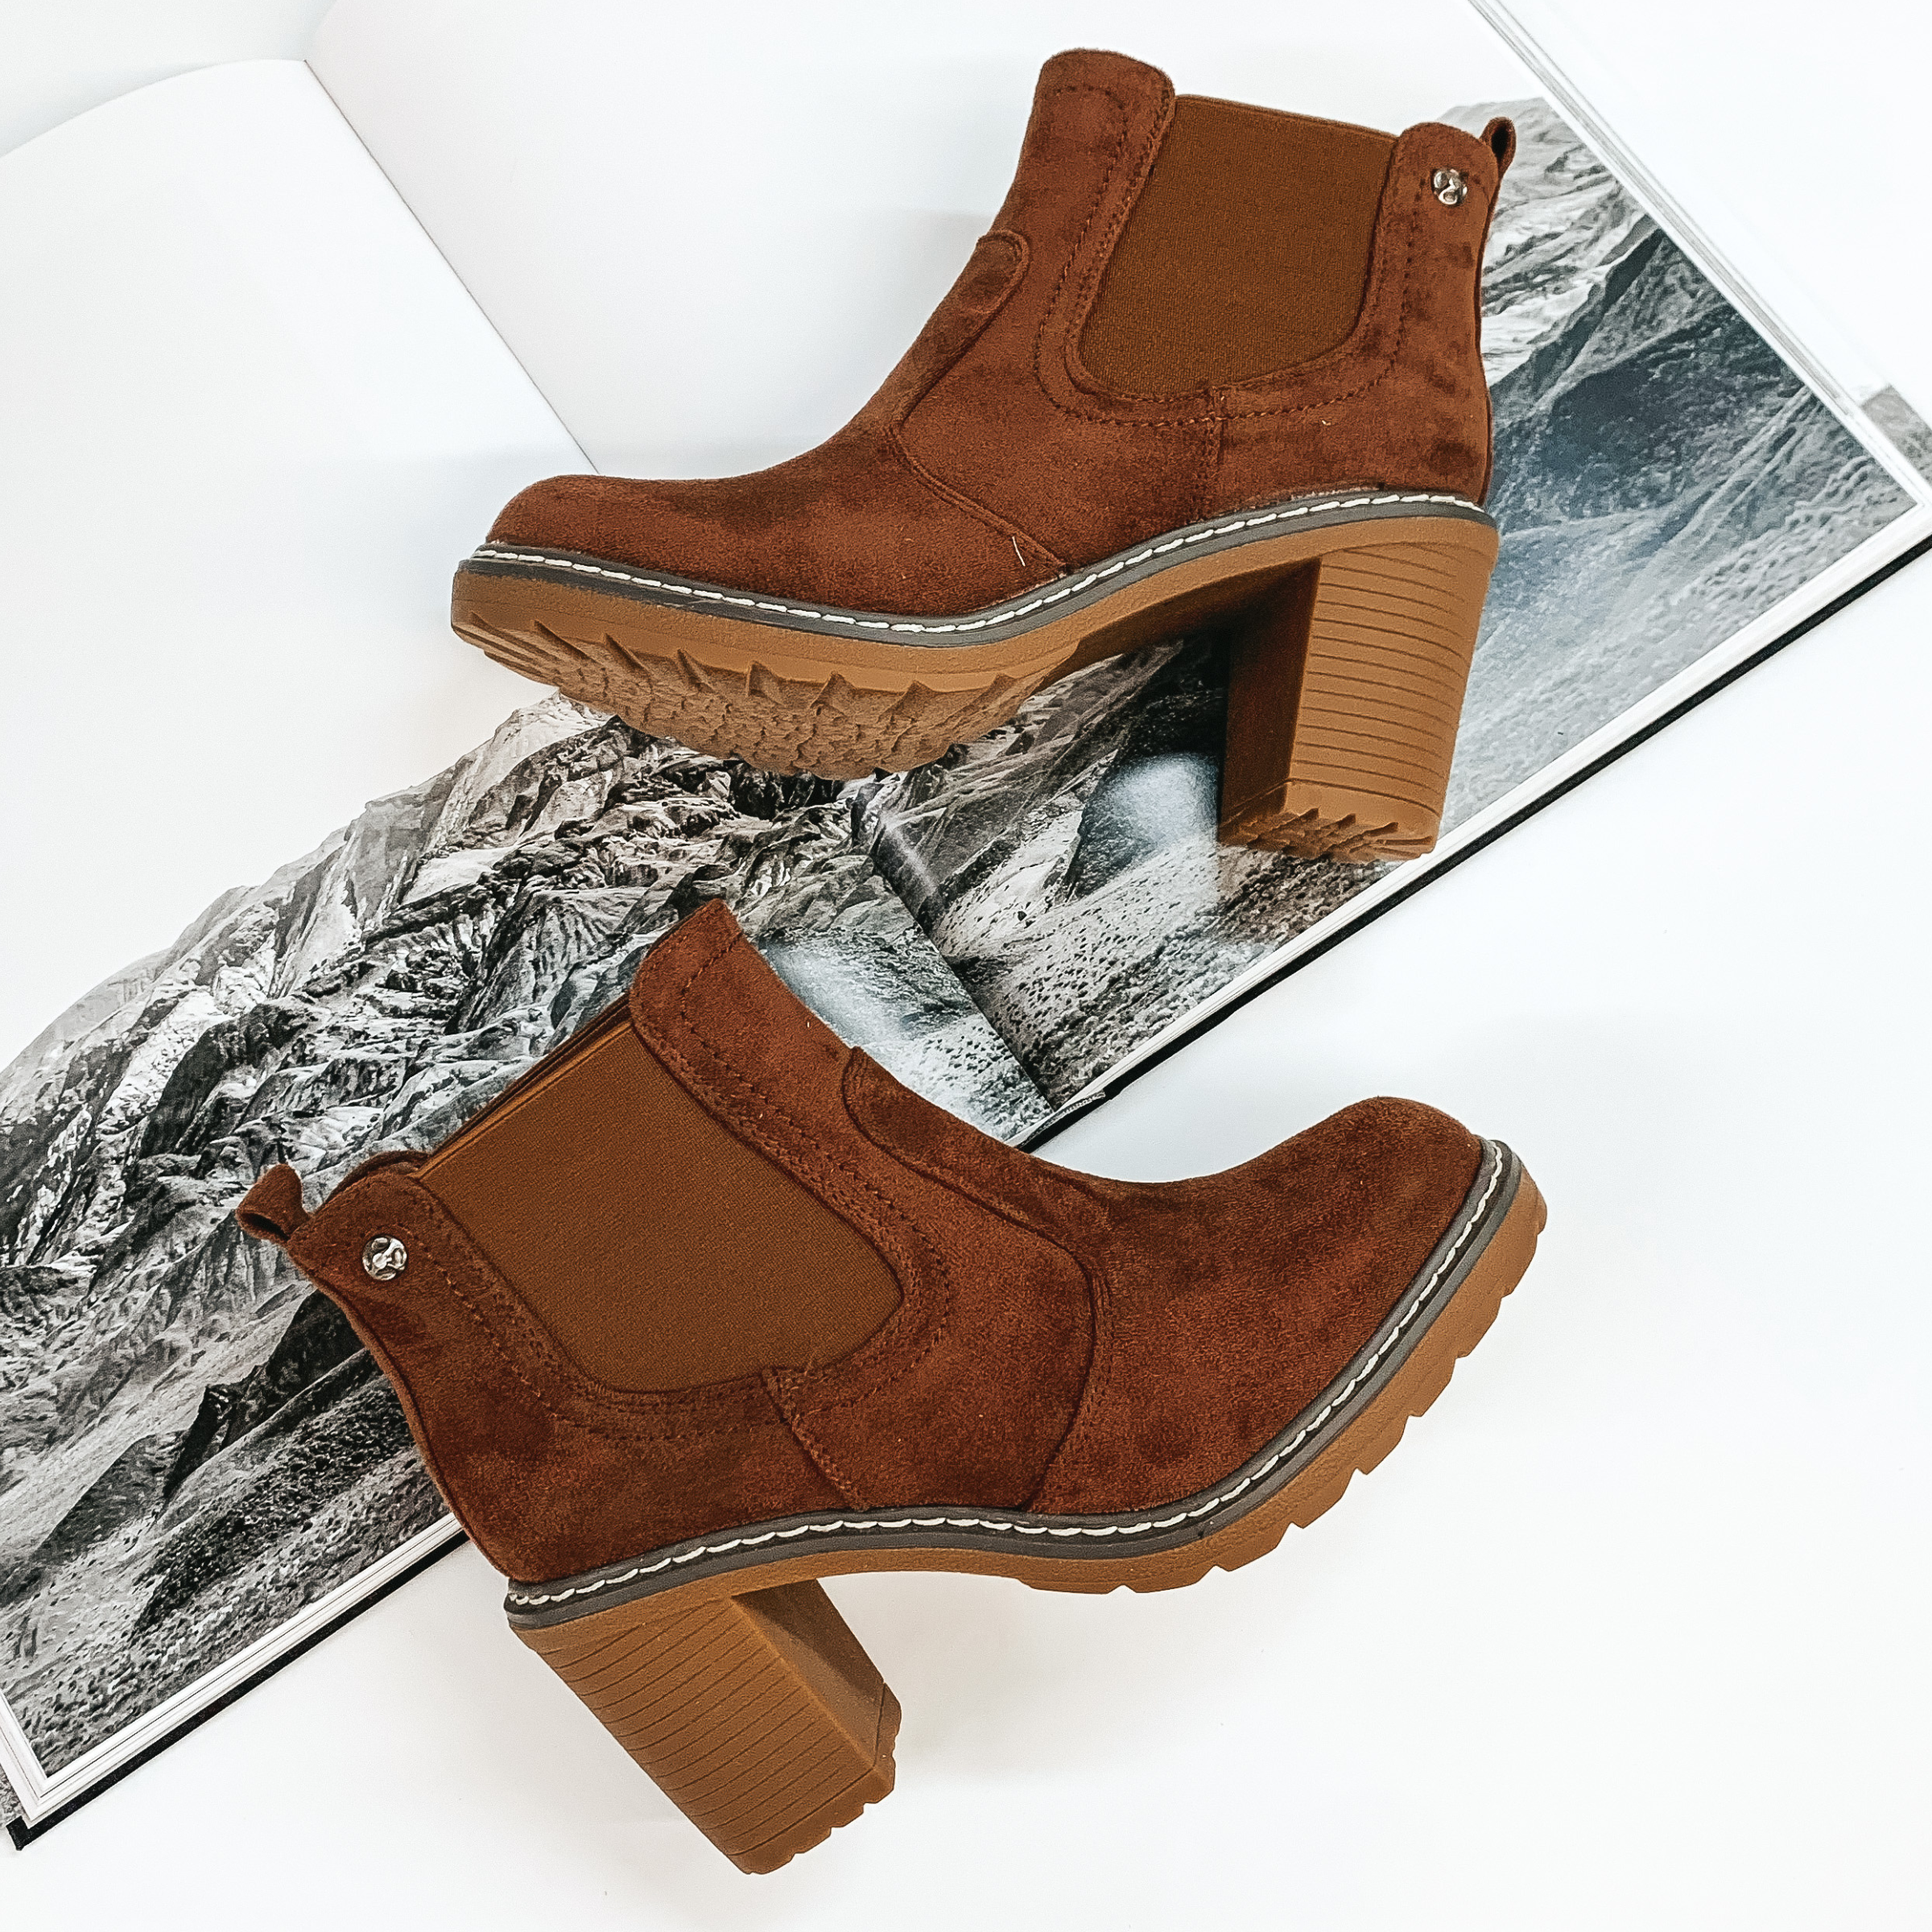 Brown suede booties with a tan rubber sole and chunky heel. These booties are pictured laying on an open book on a white background. 